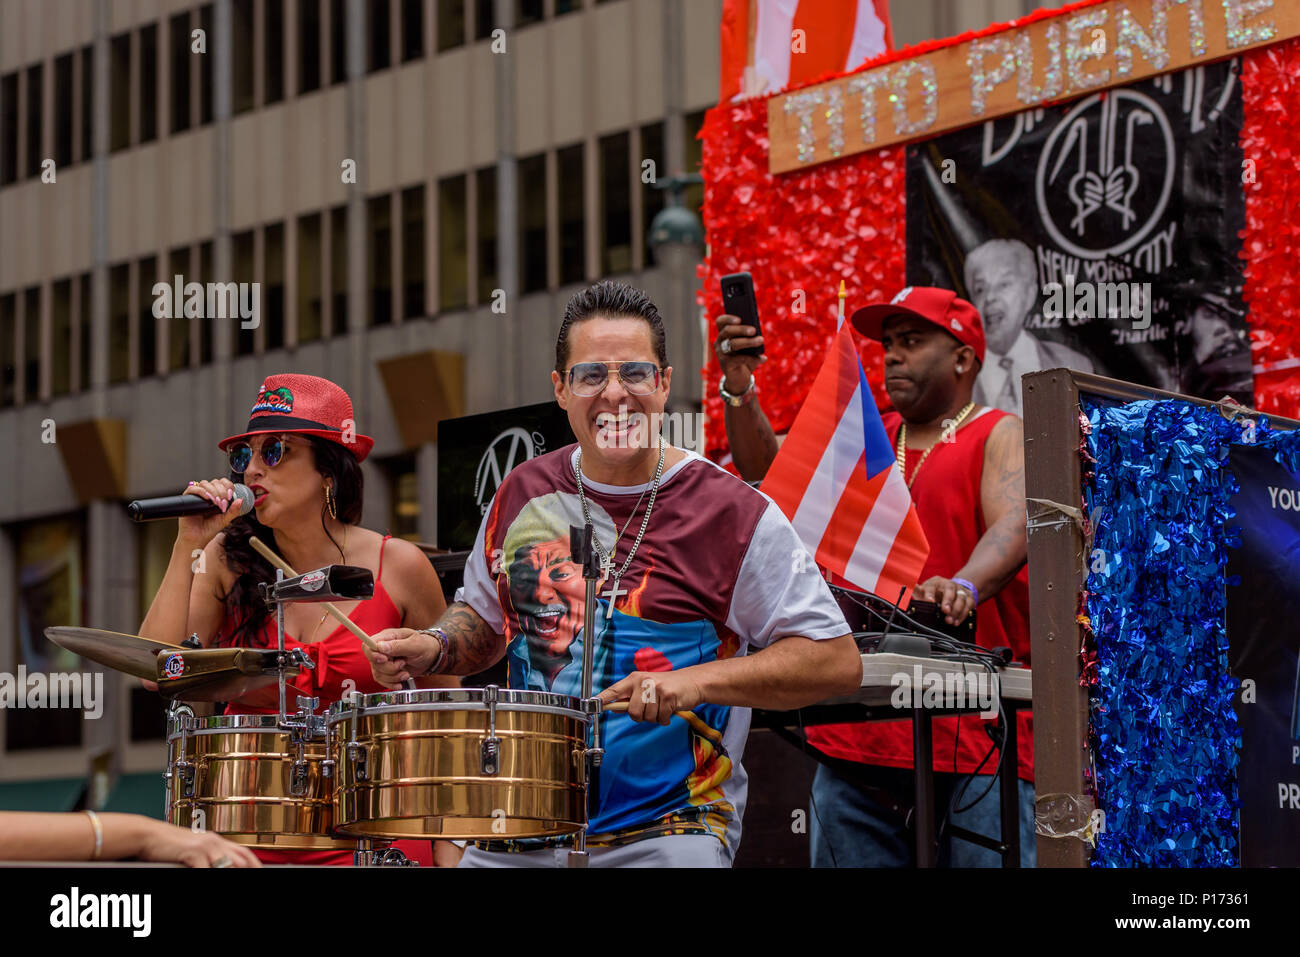 New York, United States. 10th June, 2018. Tito Puente Jr. - Under the theme, “One People, Many Voices,” The 61st Annual National Puerto Rican Day Parade continue celebrating the best of Puerto Rican culture and music while paying tribute to the heroes that contributed to the recovery, rebuilding and renewal efforts since Hurricane Maria. The Parade also announced several distinguished Puerto Ricans honorees to march up Fifth Avenue on June 10, 2018. Credit: Erik McGregor/Pacific Press/Alamy Live News Stock Photo